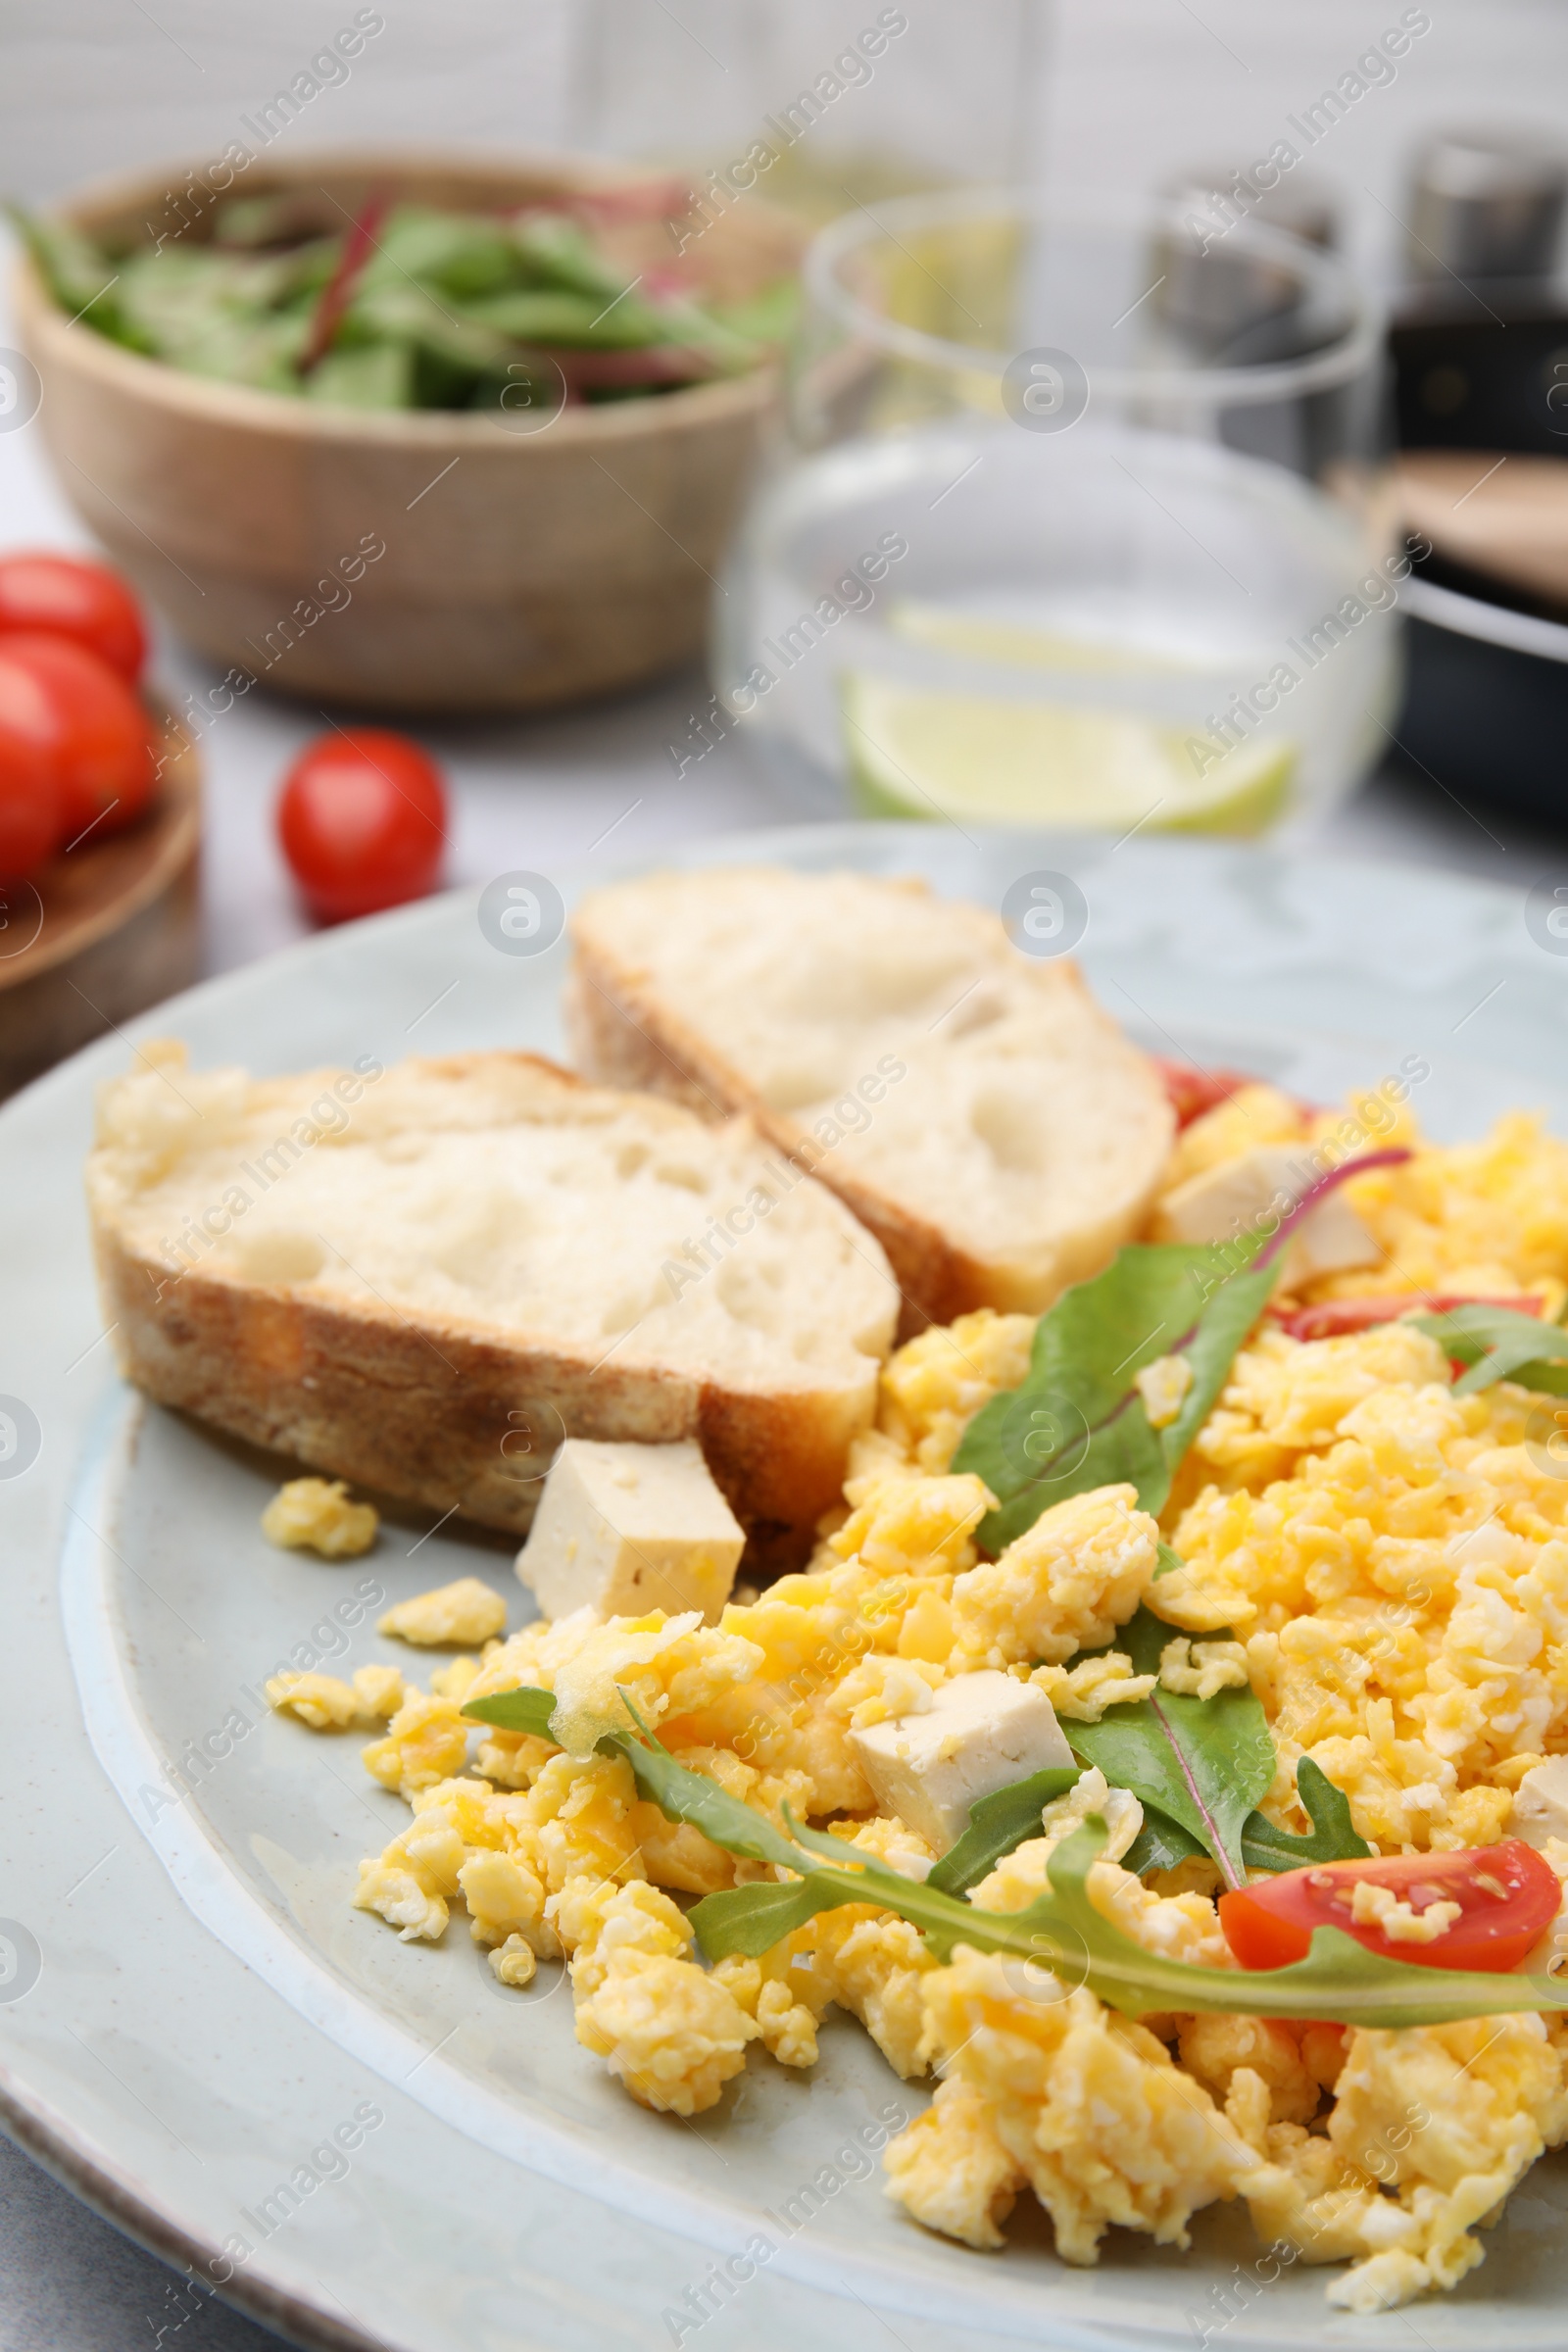 Photo of Plate with delicious scrambled eggs, tofu and slices of baguette on table, closeup